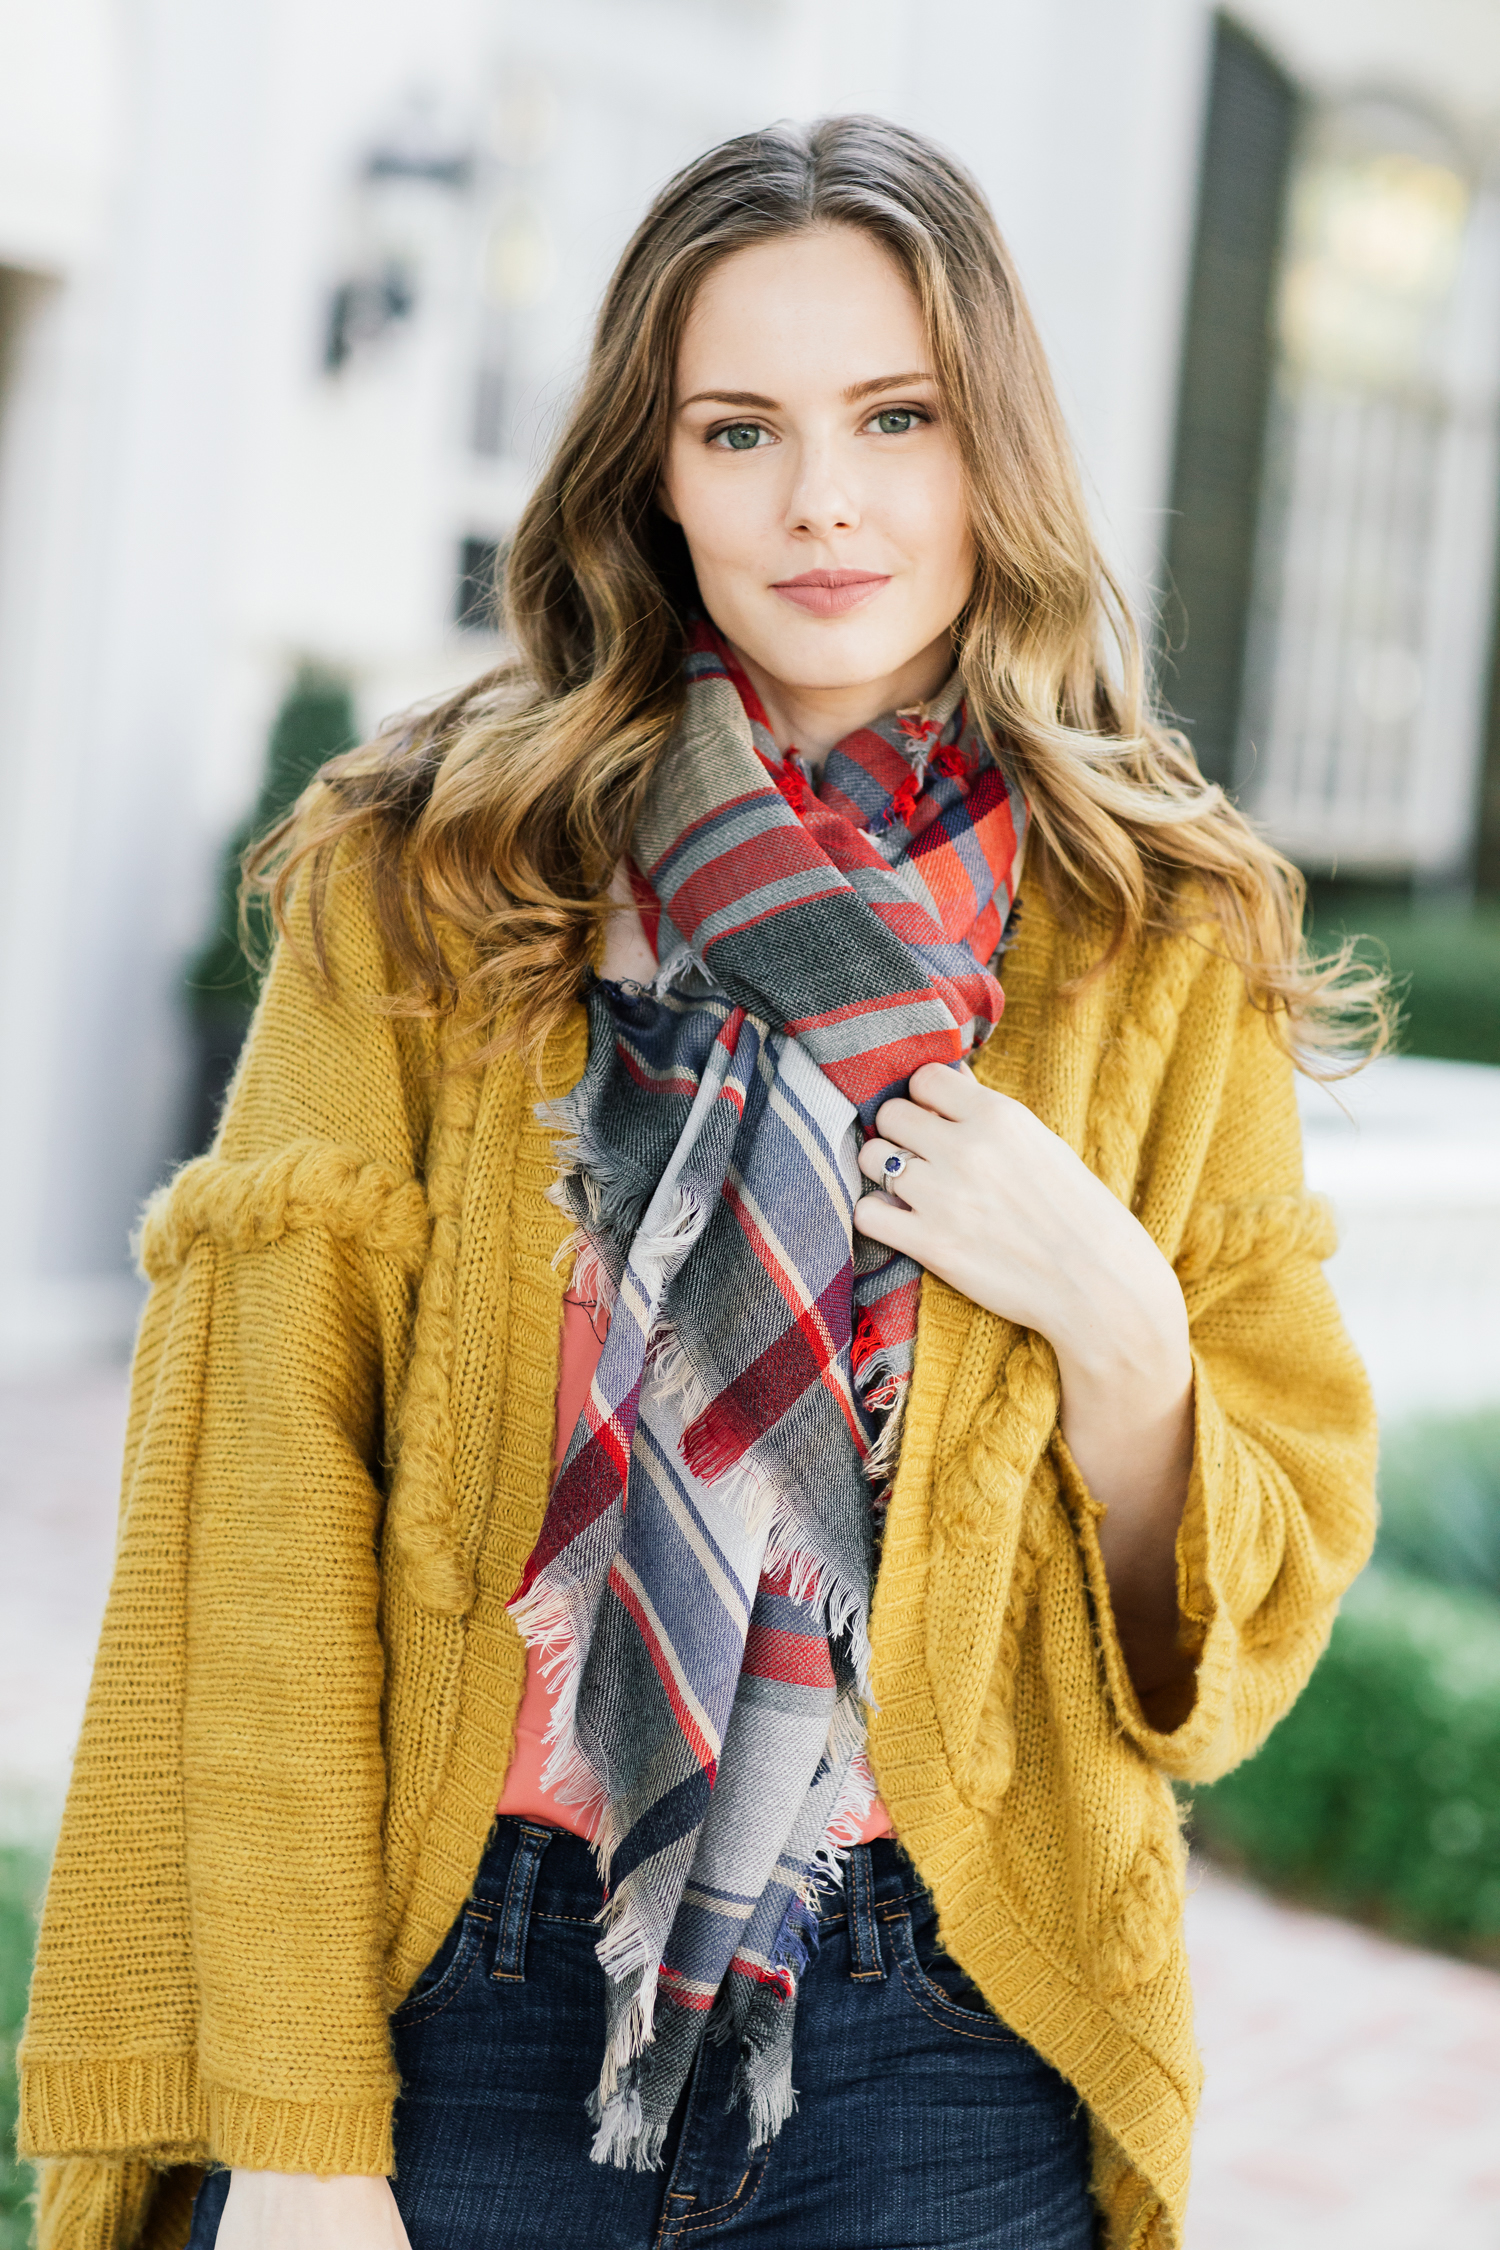 Alyssa Campanella of The A List blog wearing a cozy yellow cardigan for fall